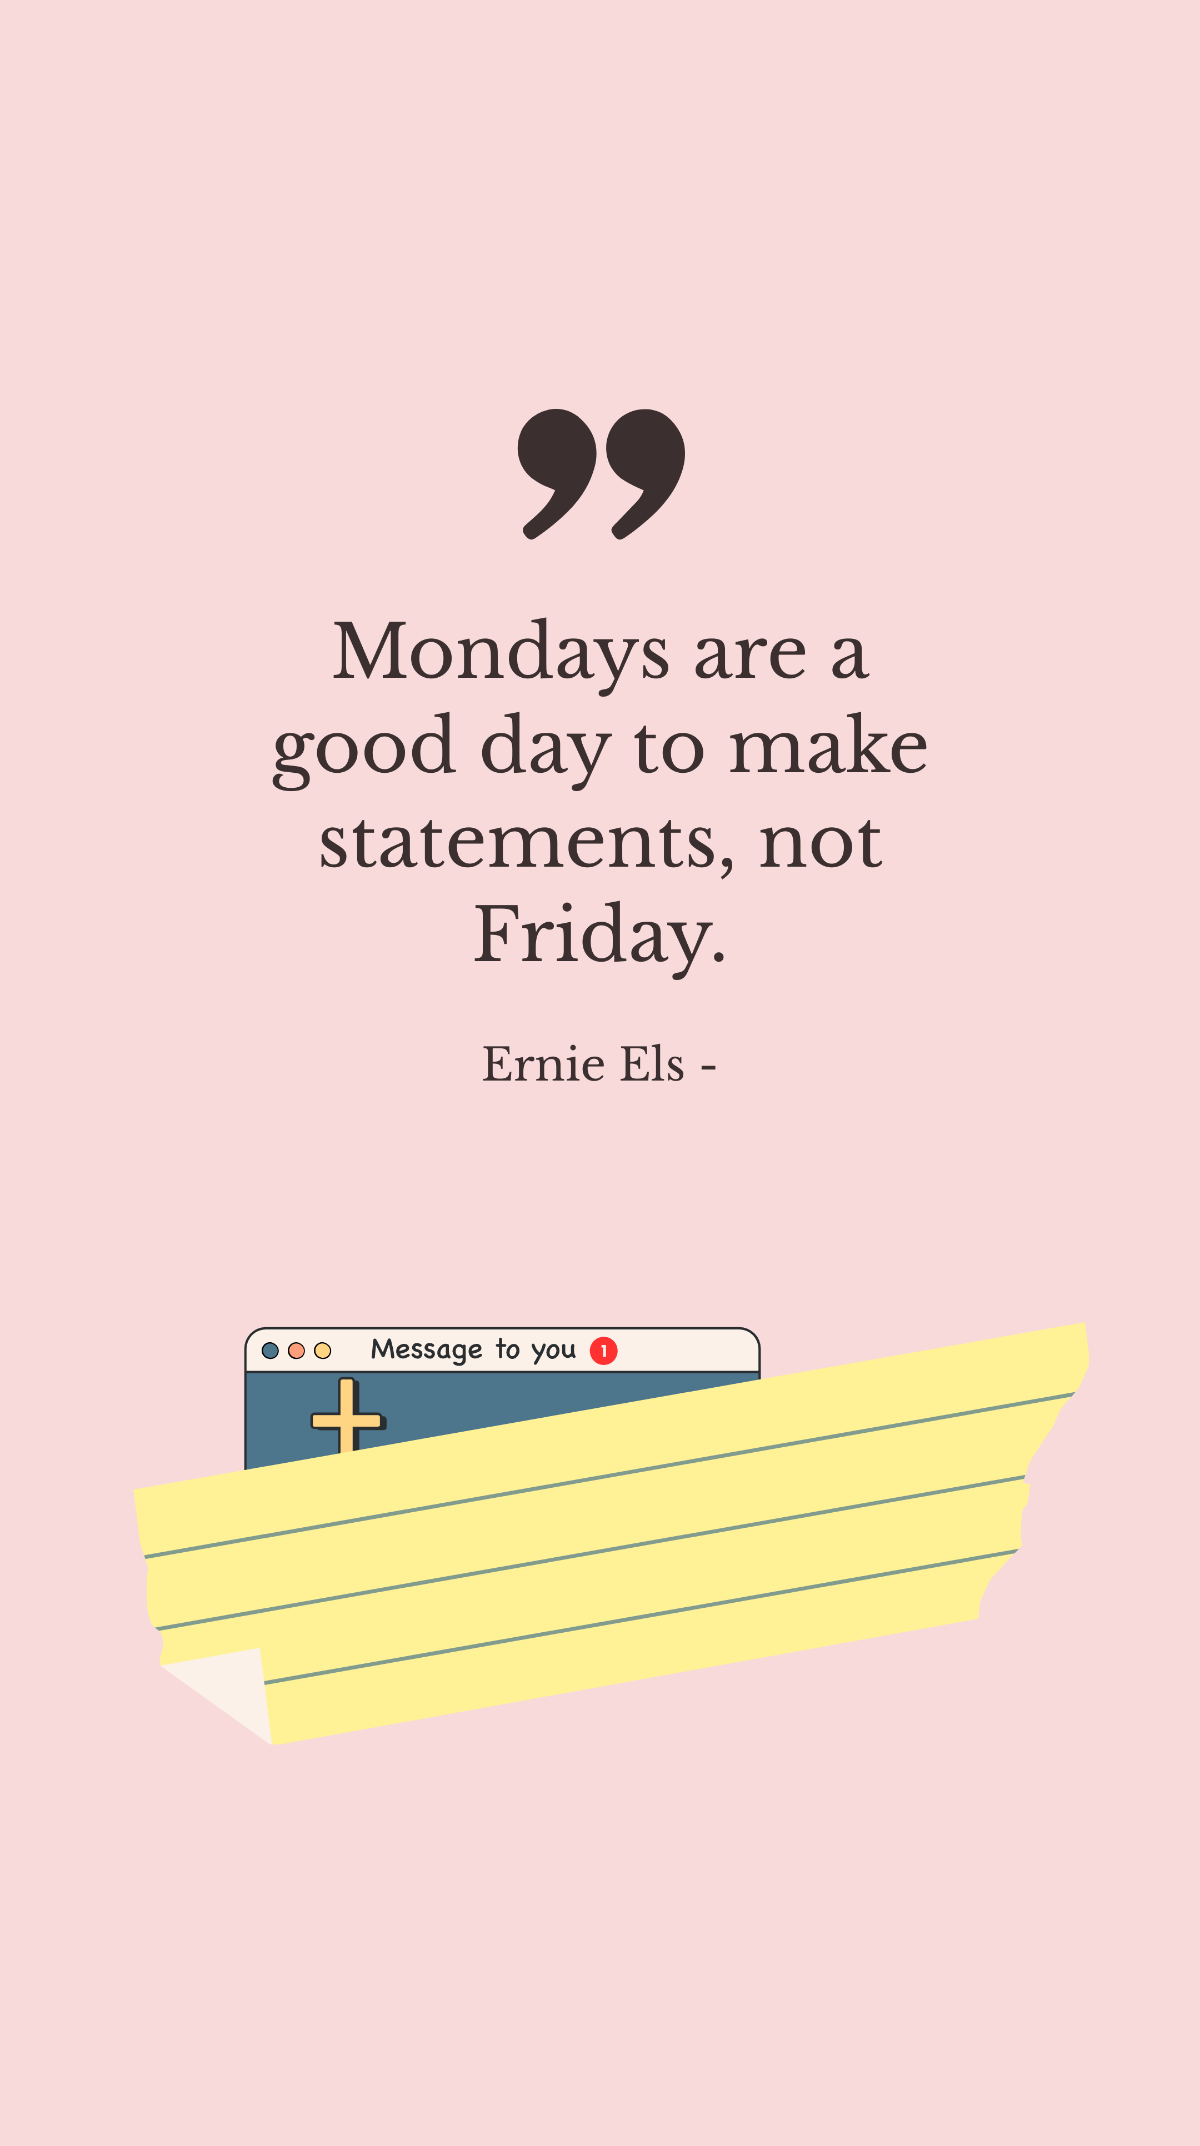 Ernie Els - Mondays are a good day to make statements, not Friday.